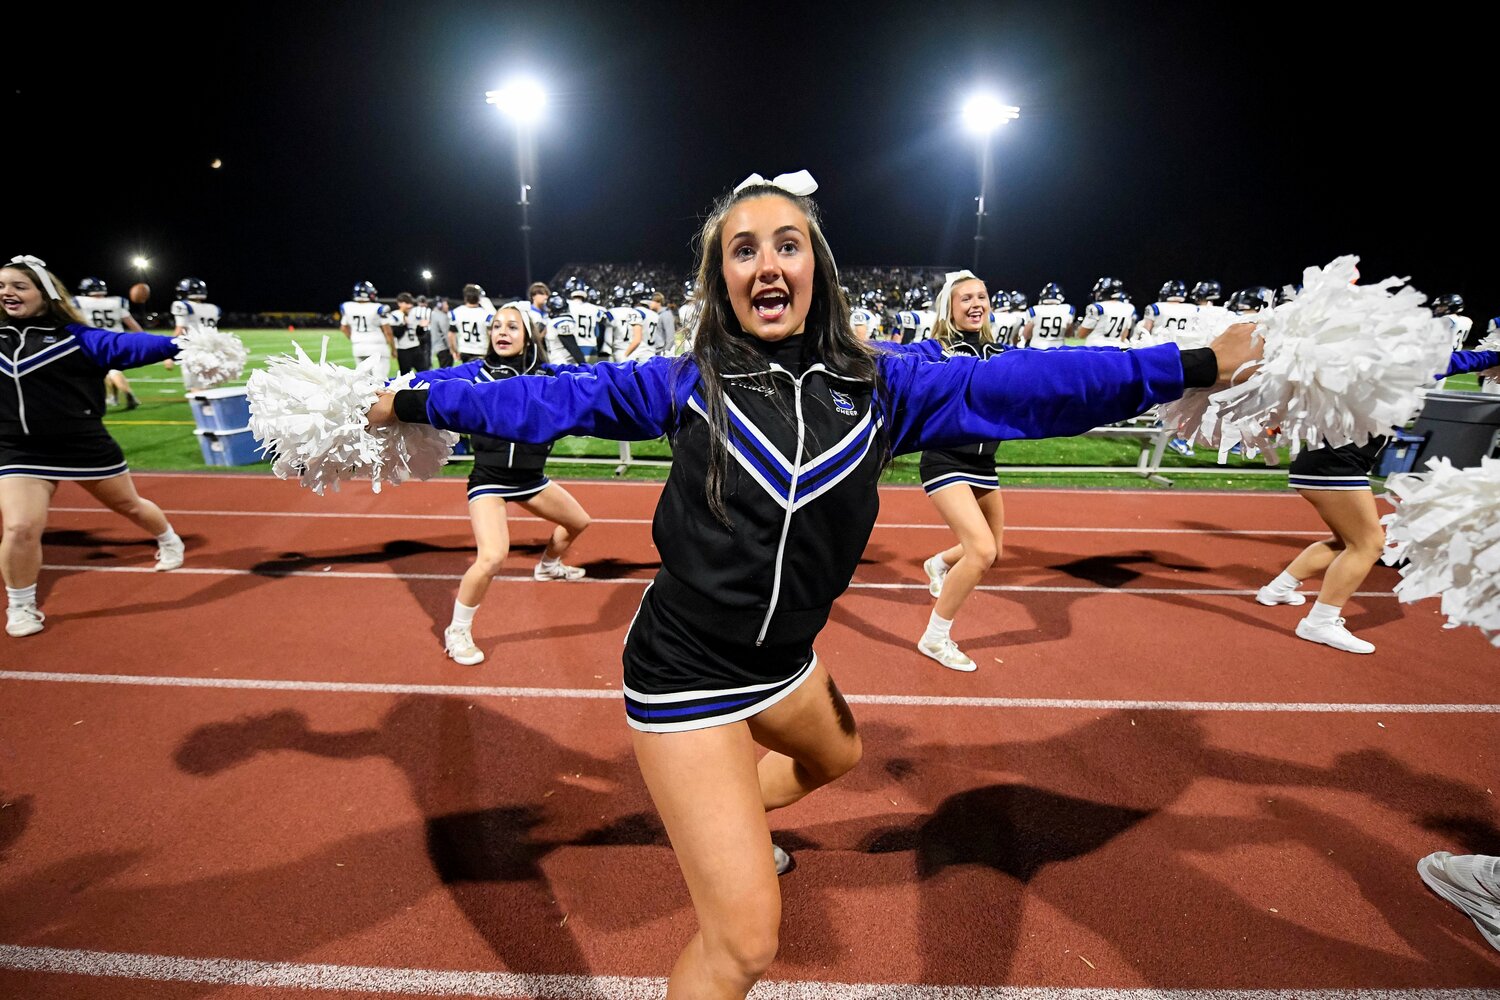 Central Bucks South cheer captain Sydney Loeb leads the cheerleaders during kickoff.